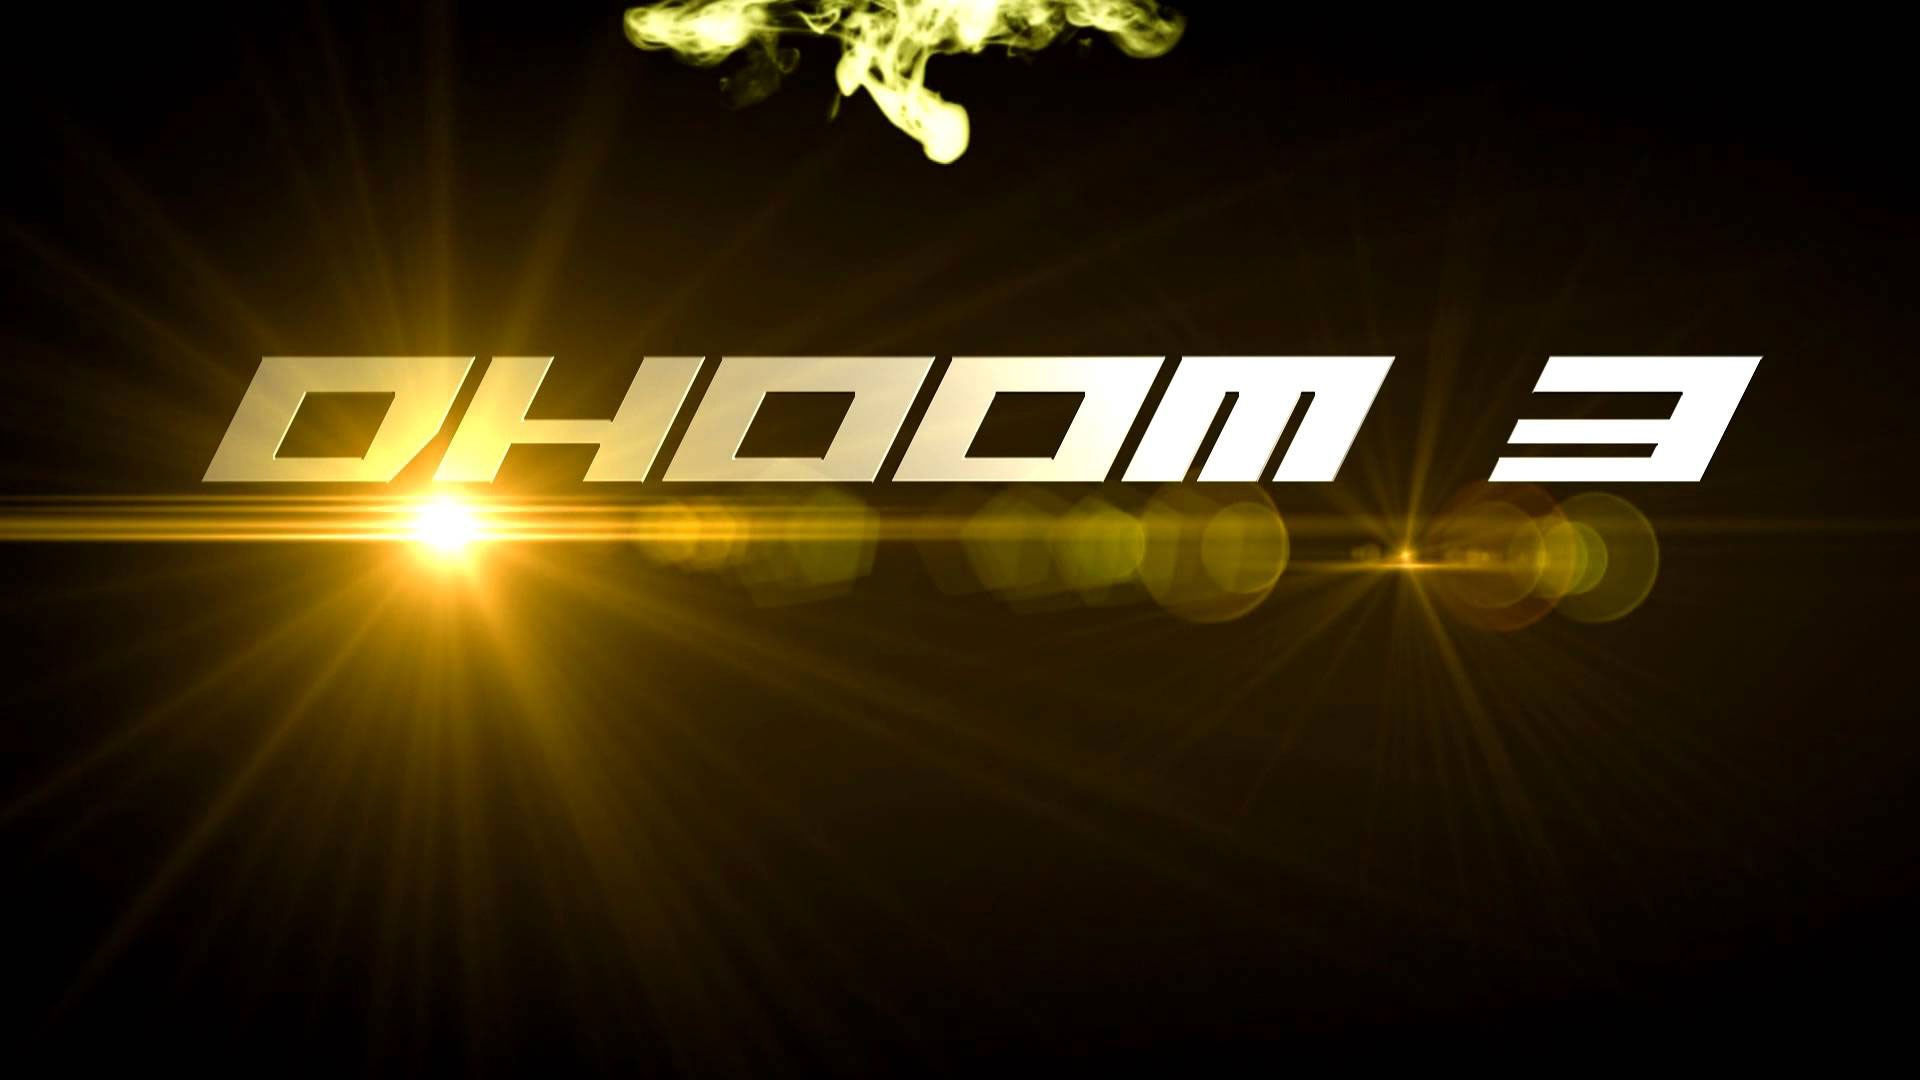 Wallpaper 3of 5 | Dhoom 3 Wallpapers | Dhoom 3 images | Dhoom 3 gallery